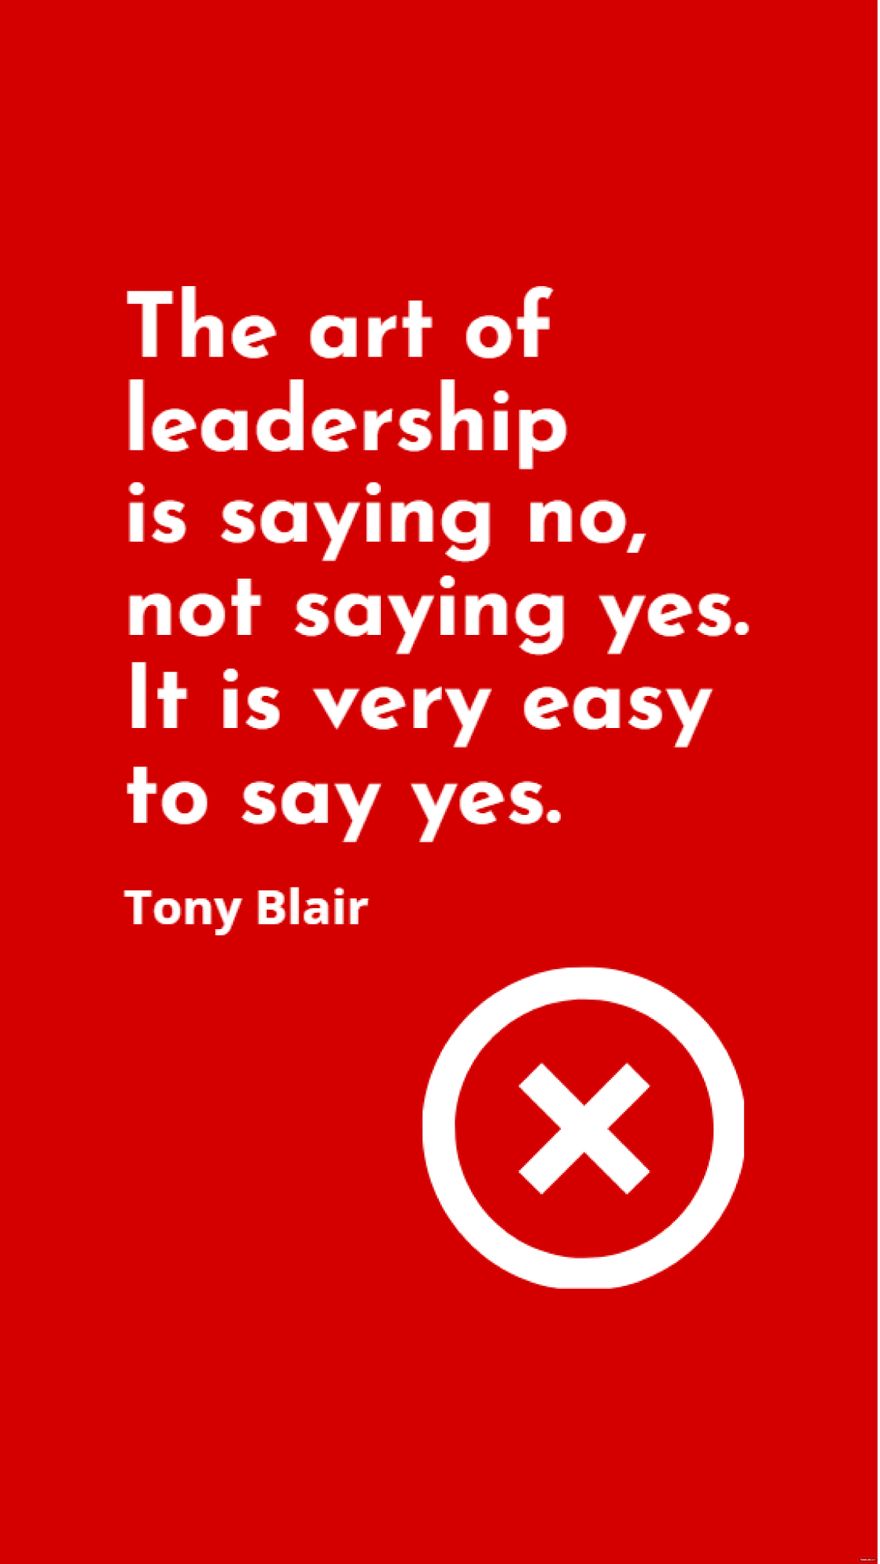 Free Tony Blair - The art of leadership is saying no, not saying yes. It is very easy to say yes.